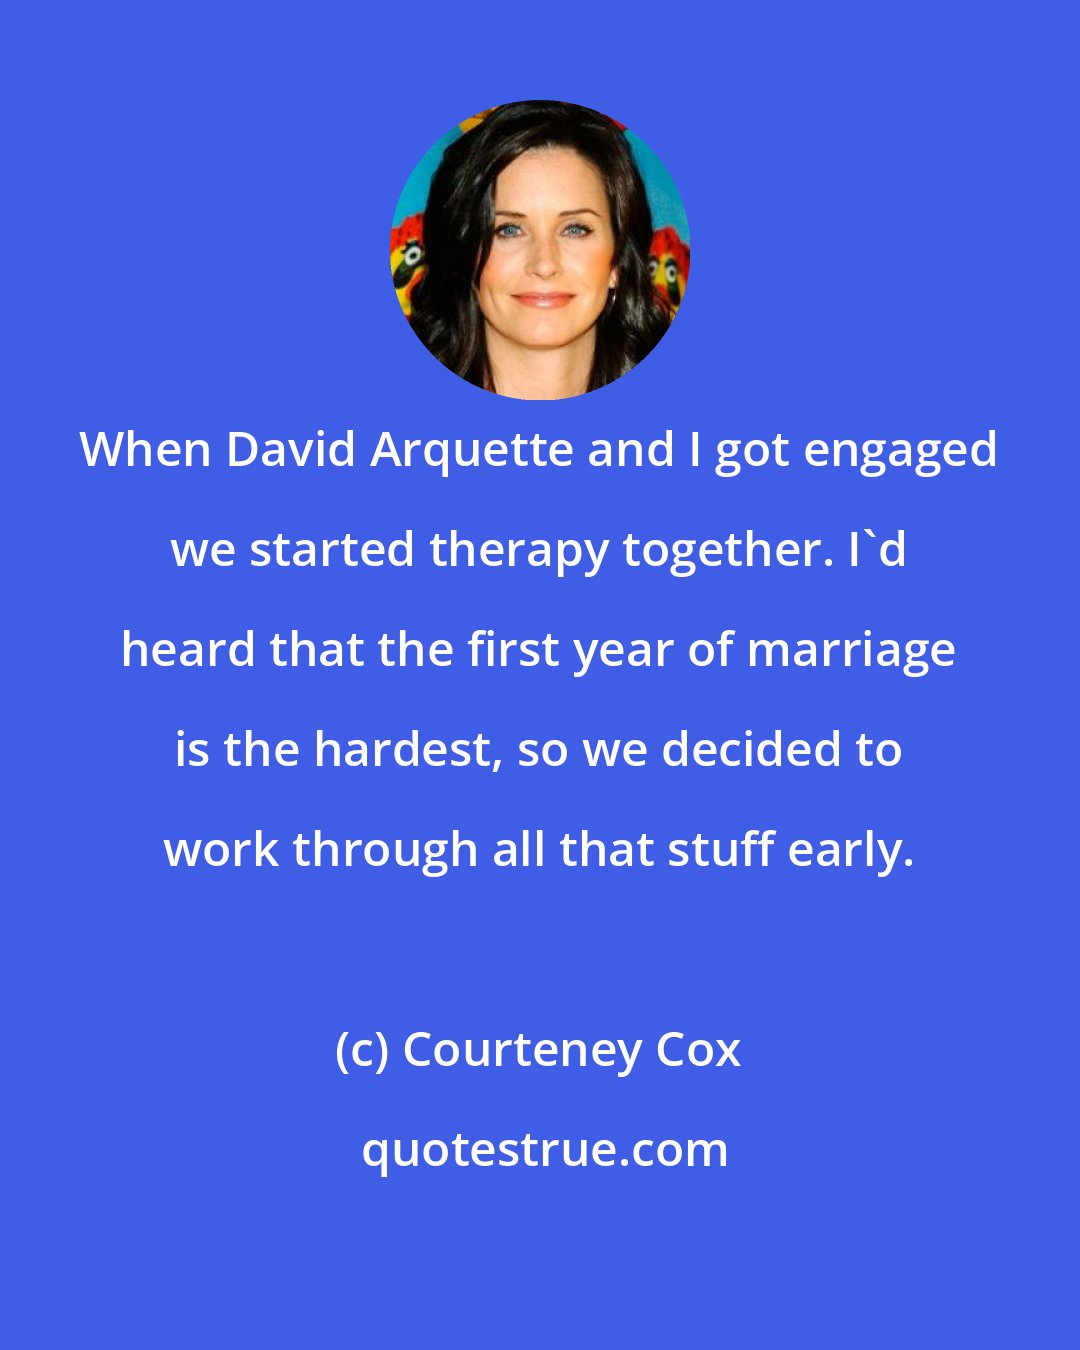 Courteney Cox: When David Arquette and I got engaged we started therapy together. I'd heard that the first year of marriage is the hardest, so we decided to work through all that stuff early.